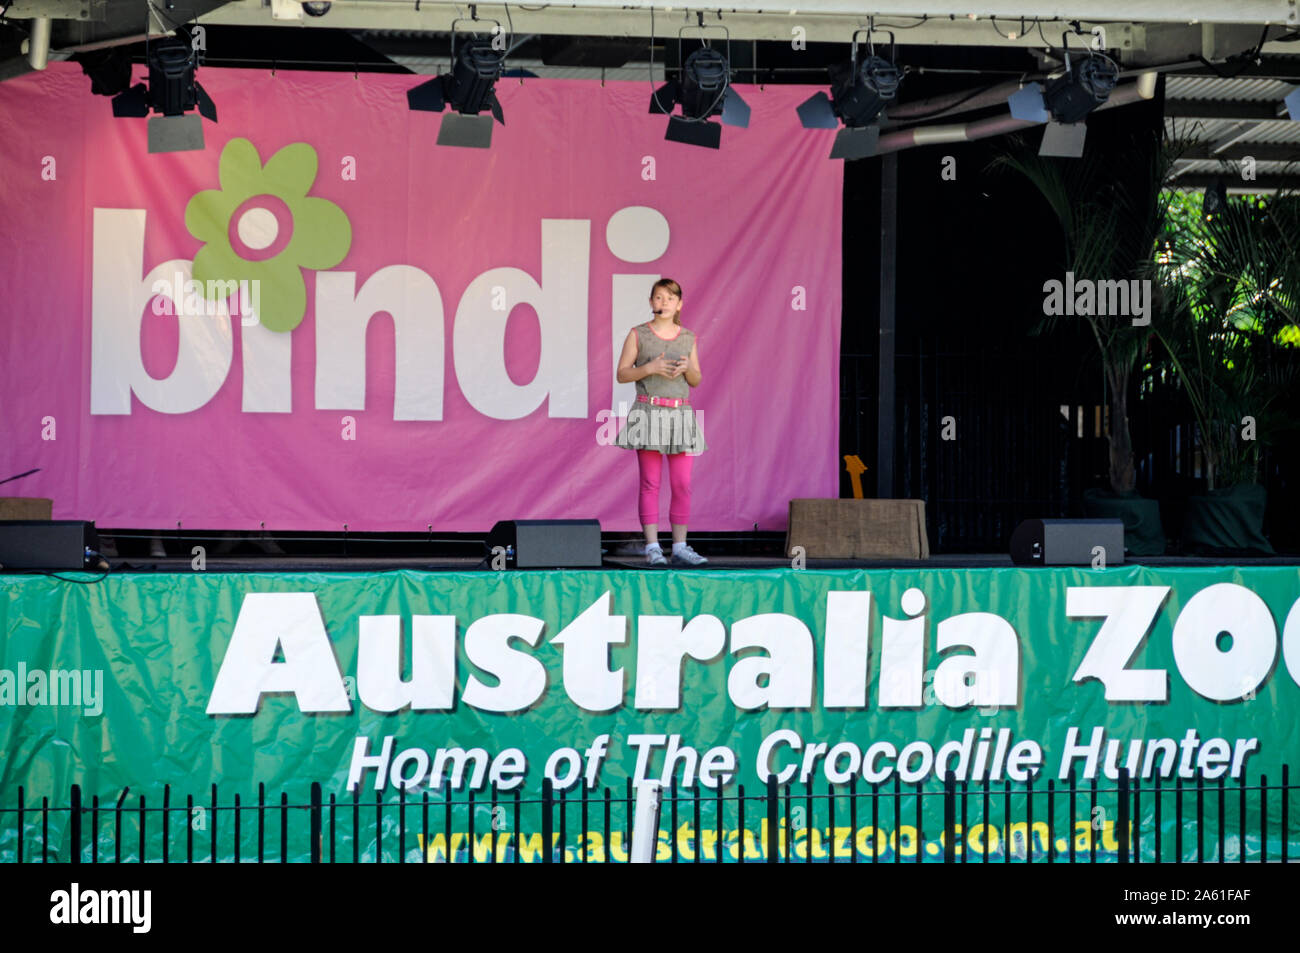 Bindi Irwin gives an introduction before her dance and song performance during showtime inside the Crocoseum at the Australian Zoo in Queensland, Aust Stock Photo